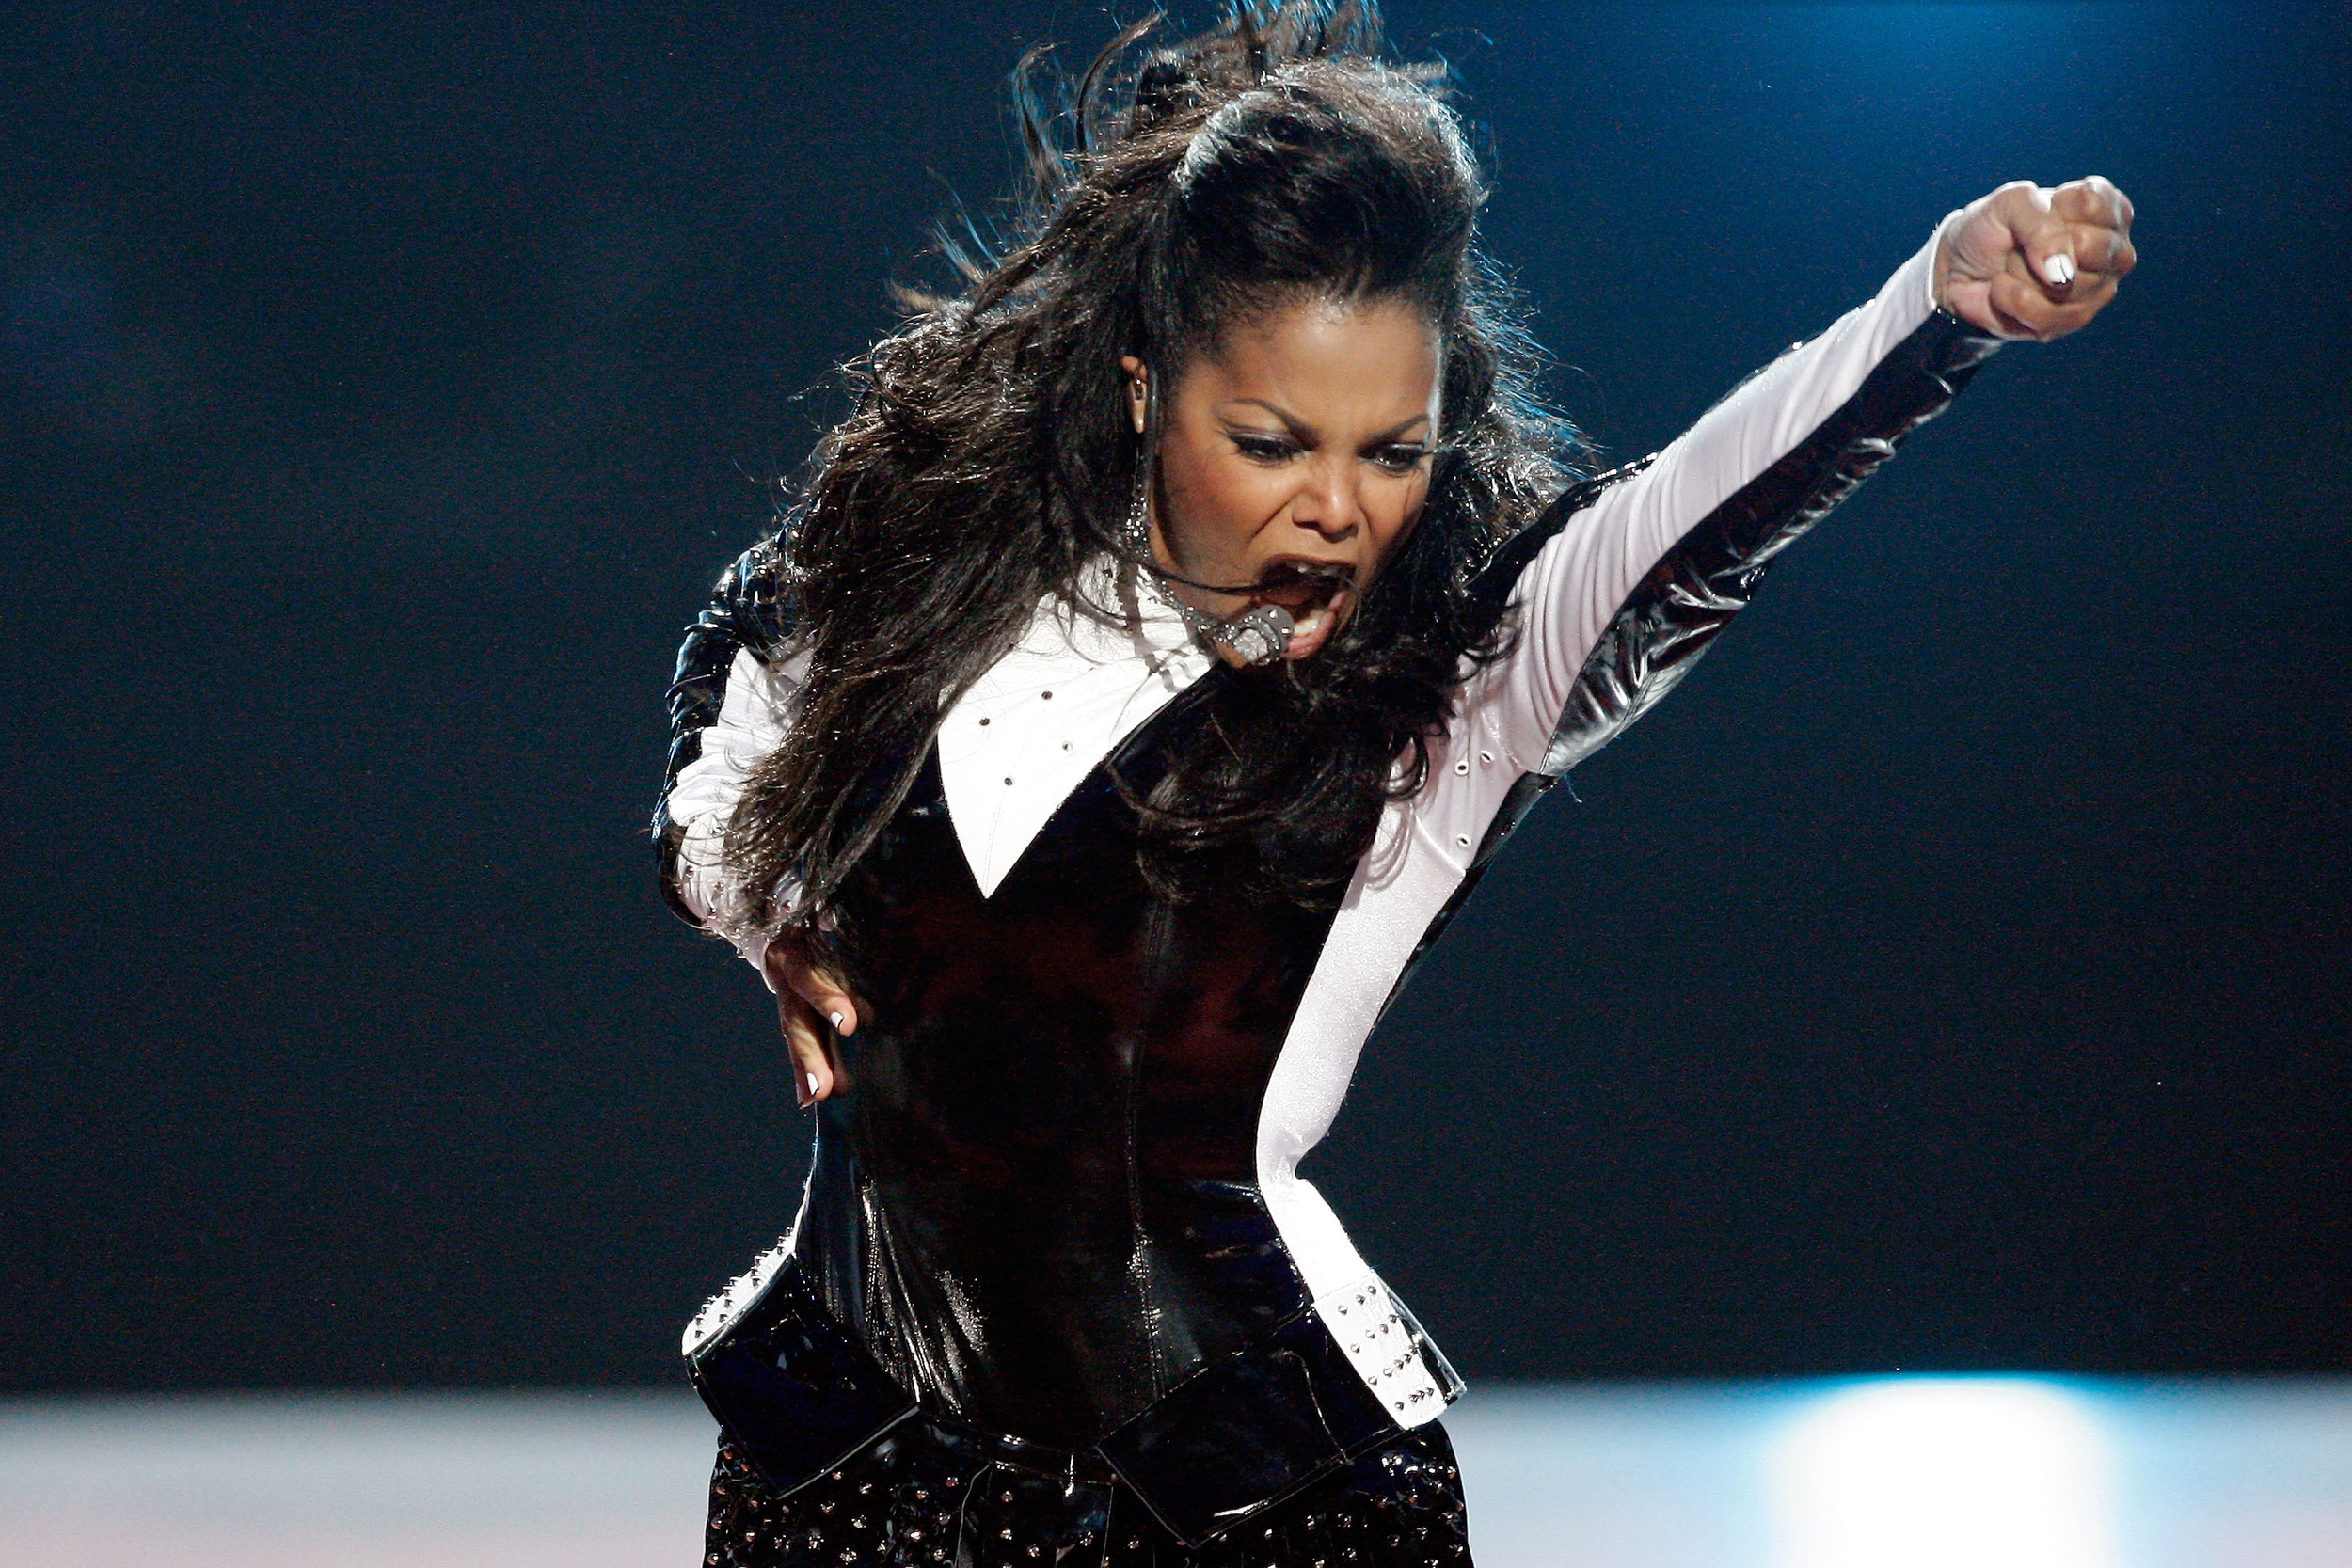 <p>In 2023, Janet Jackson embarked on her sold-out "Together Again" tour with special guest Ludacris. Well, she’s bringing the tour back again, and this time she’s bringing Nelly along for the ride. Jackson and Nelly will trek across 35 cities including Chicago, New Orleans, Toronto, and Los Angeles. </p><p><a href='https://www.msn.com/en-us/community/channel/vid-cj9pqbr0vn9in2b6ddcd8sfgpfq6x6utp44fssrv6mc2gtybw0us'>Follow us on MSN to see more of our exclusive entertainment content.</a></p>